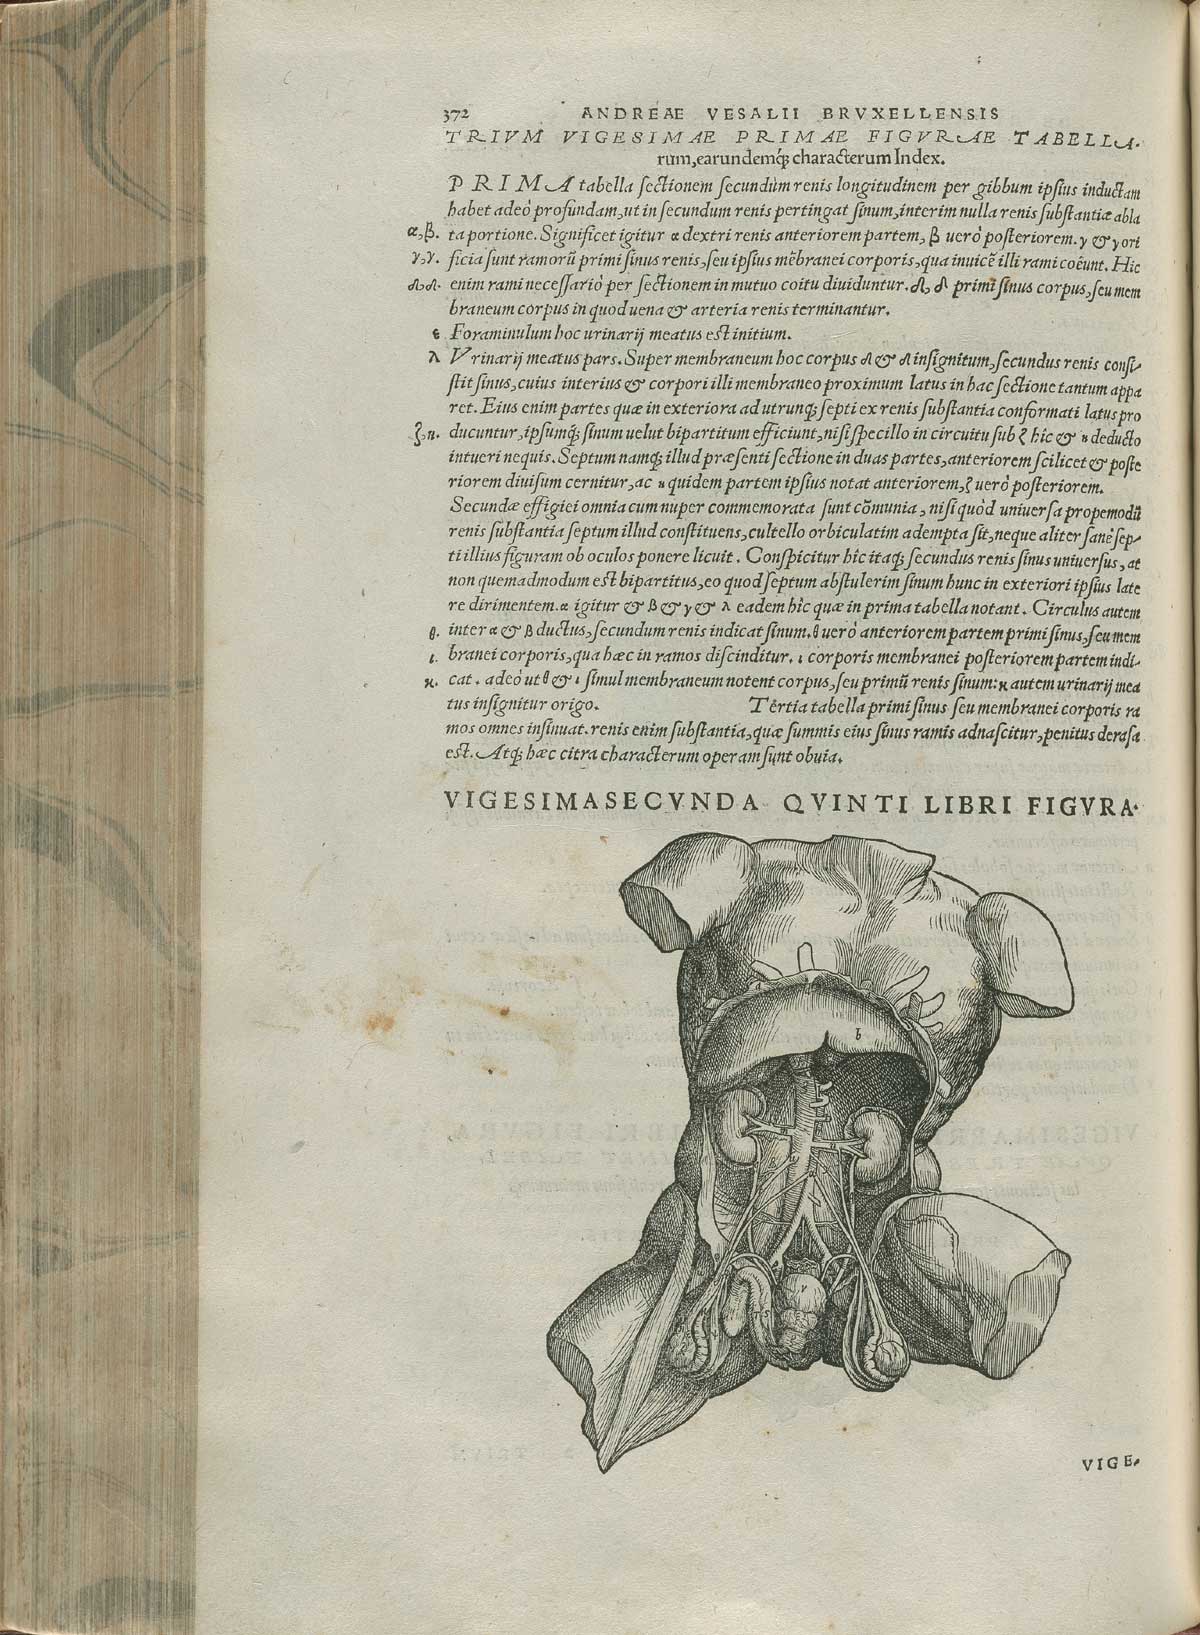 Page 472 of Andreas Vesalius' De corporis humani fabrica libri septem, featuring the illustrated woodcut of the abdominal cavity further exposed to show the genito-urinary sytem.